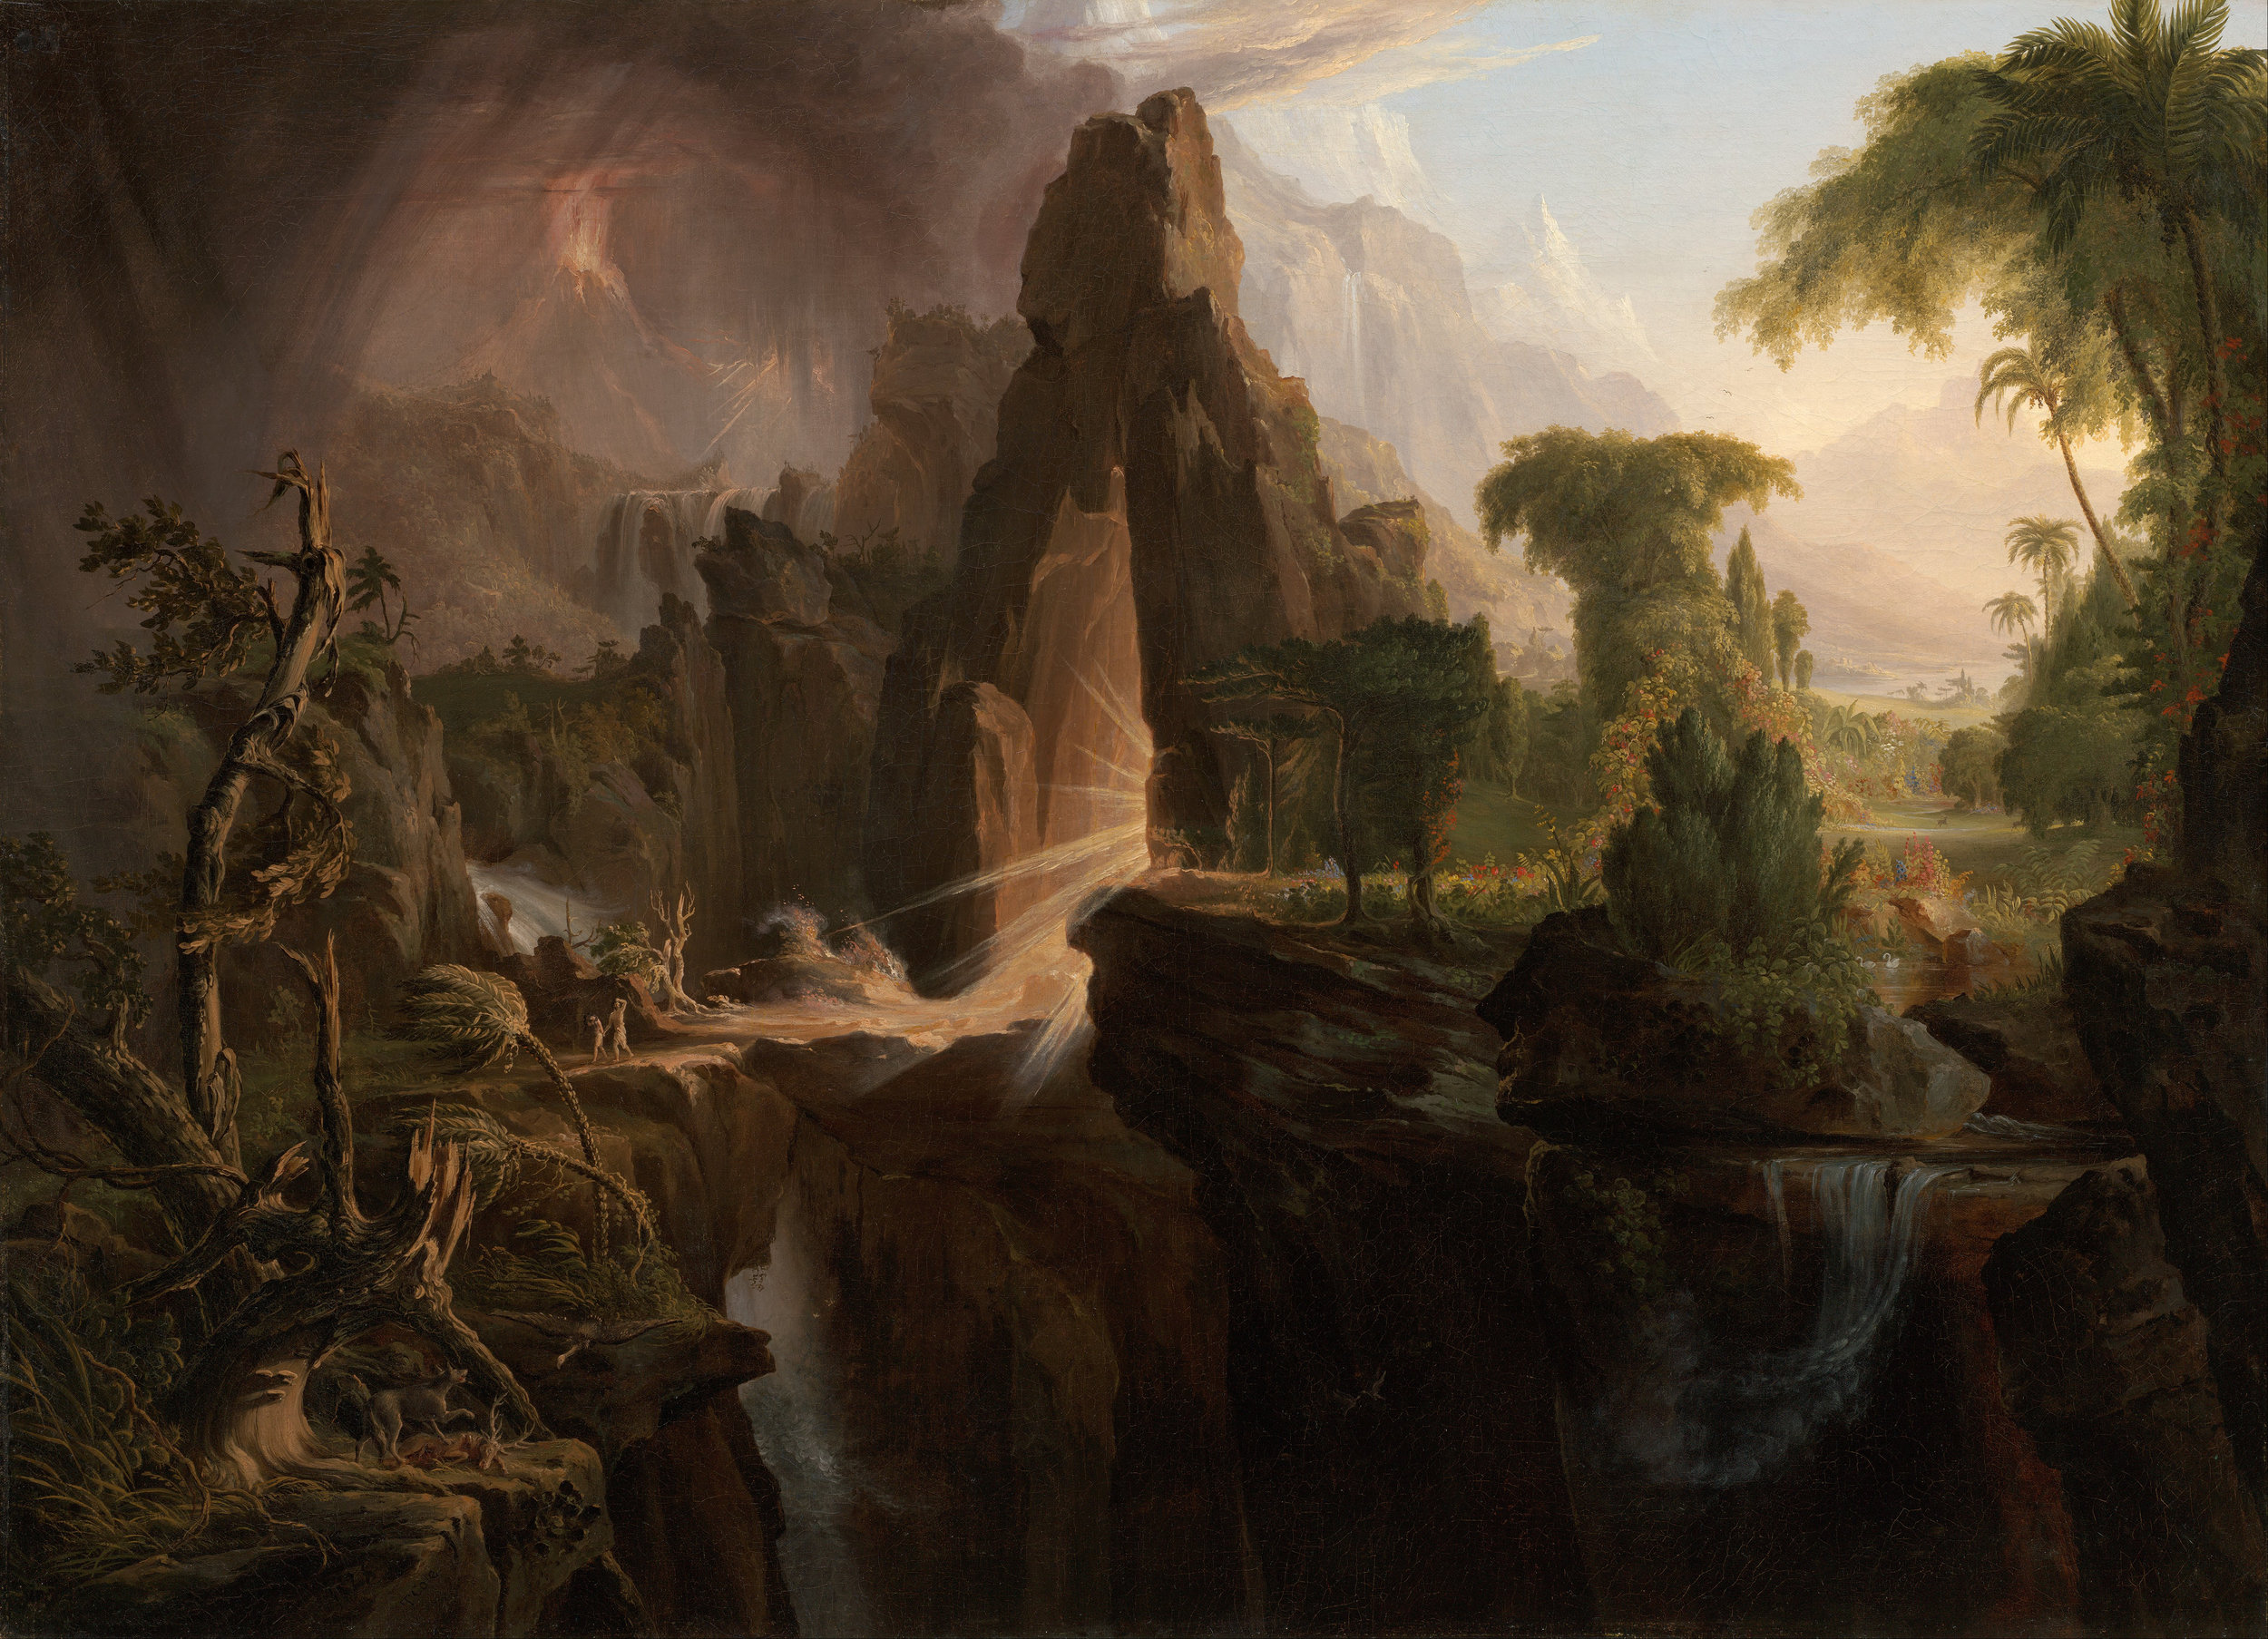 Thomas_Cole_-_Expulsion_from_the_Garden_of_Eden_-_Google_Art_Project.jpg